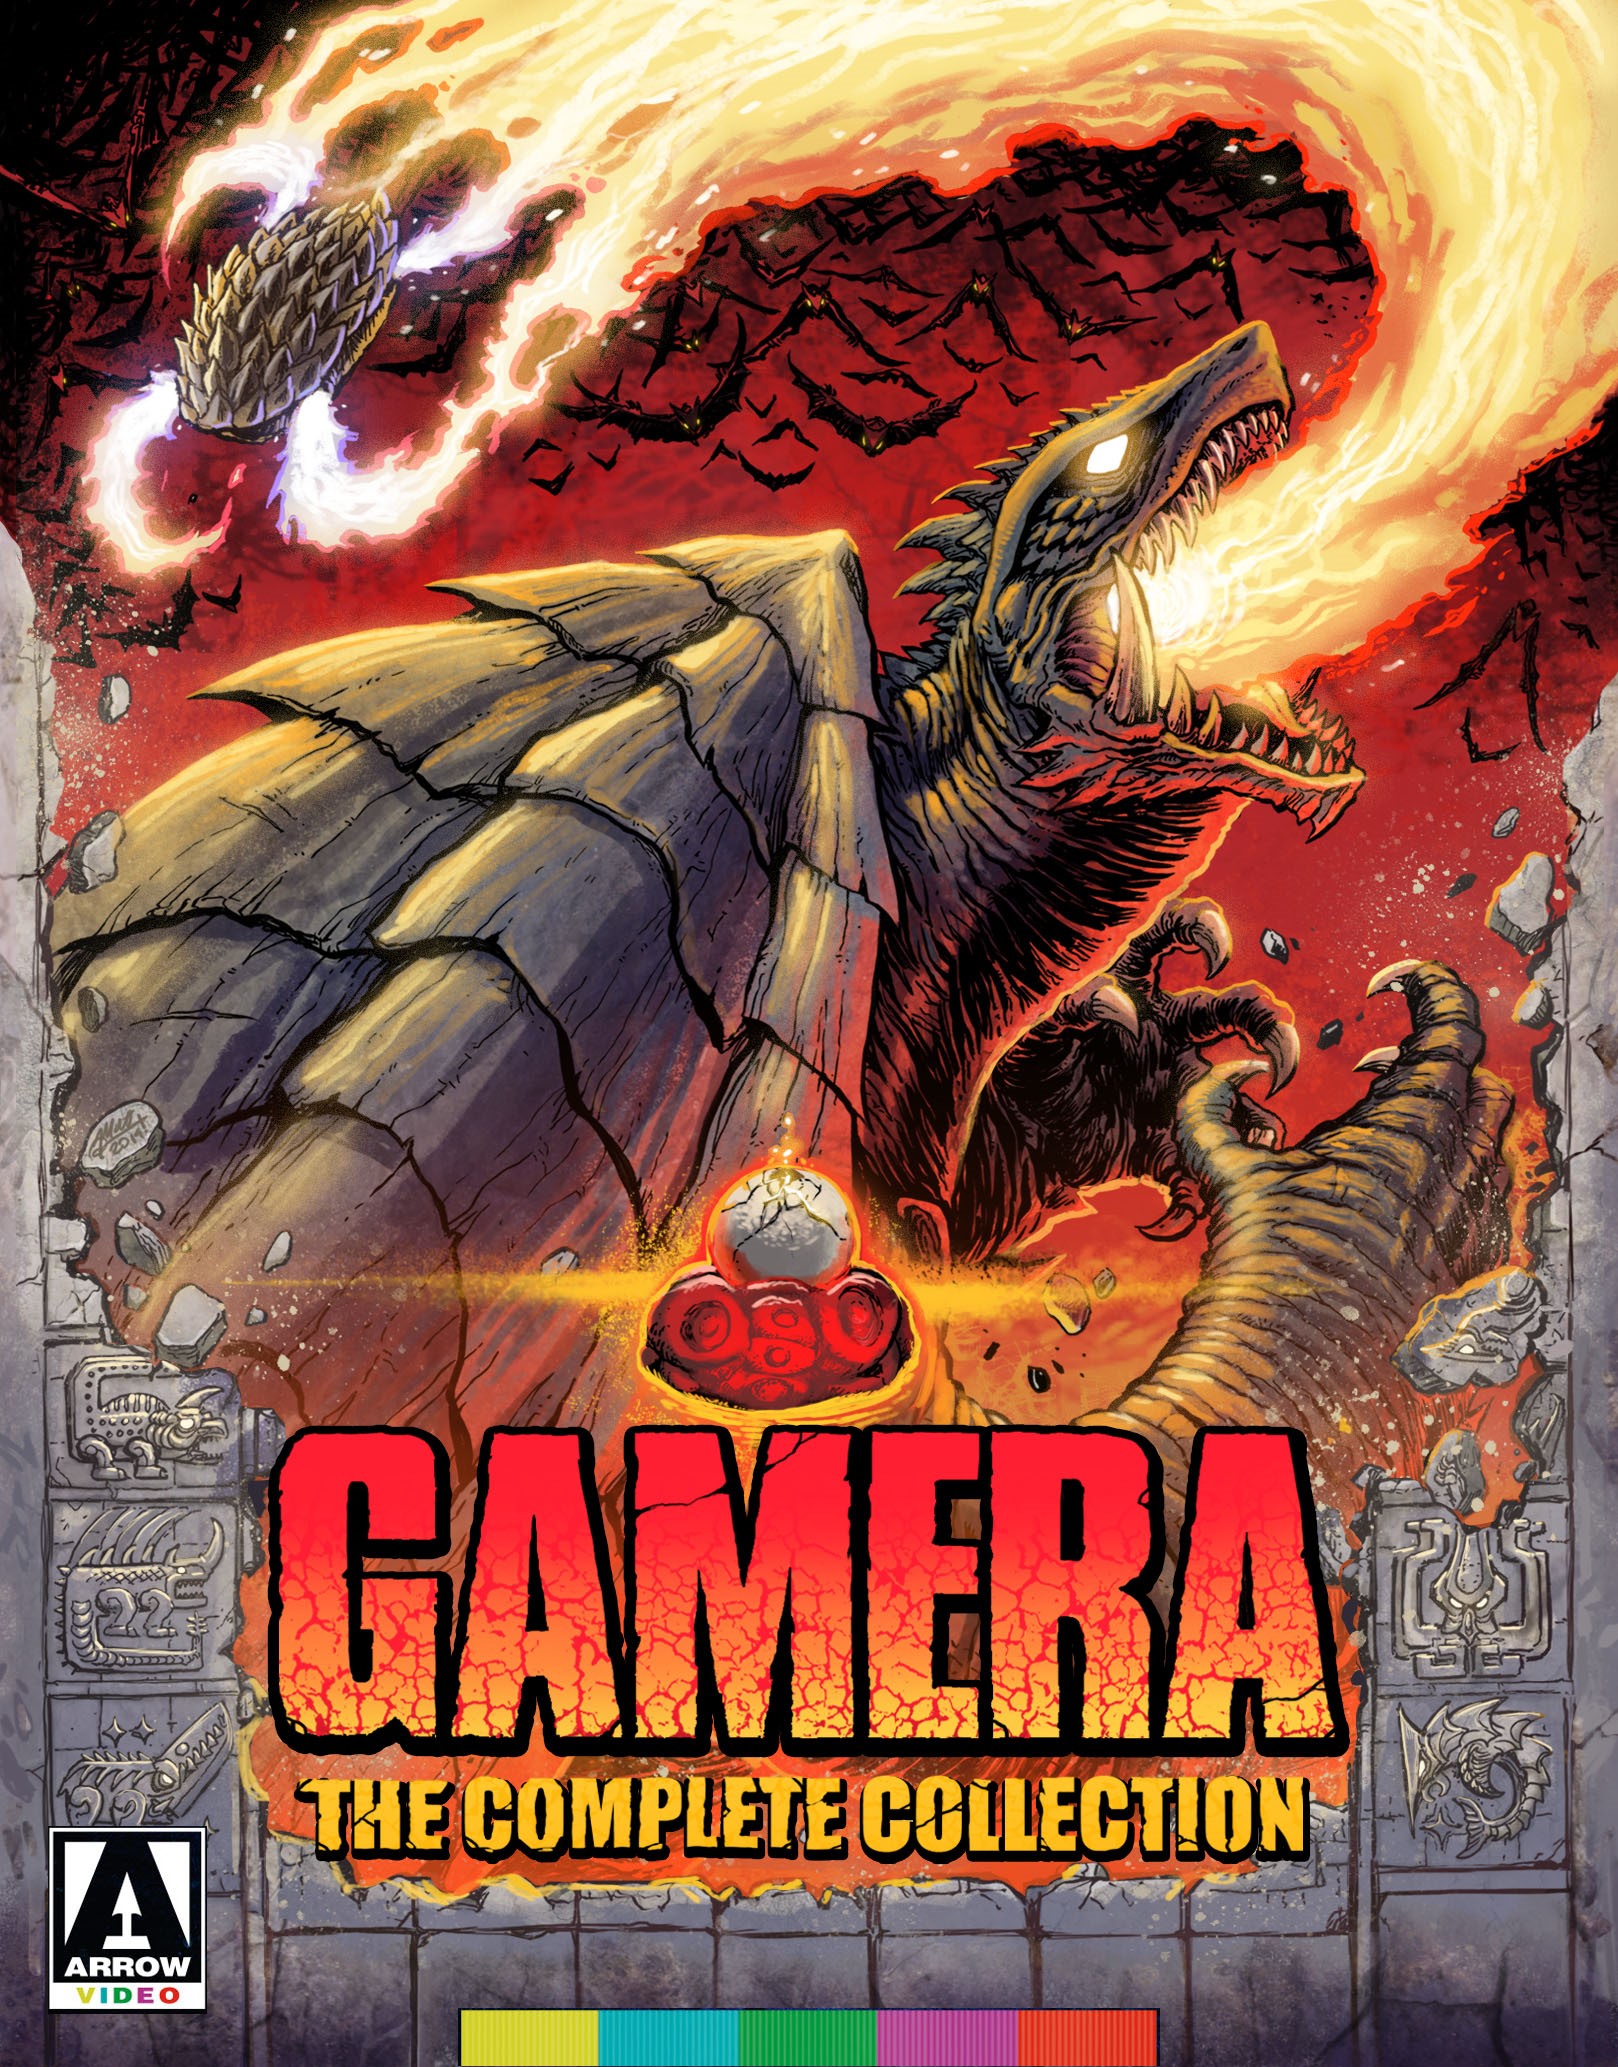 Gamera: The Complete Collection limited edition box set